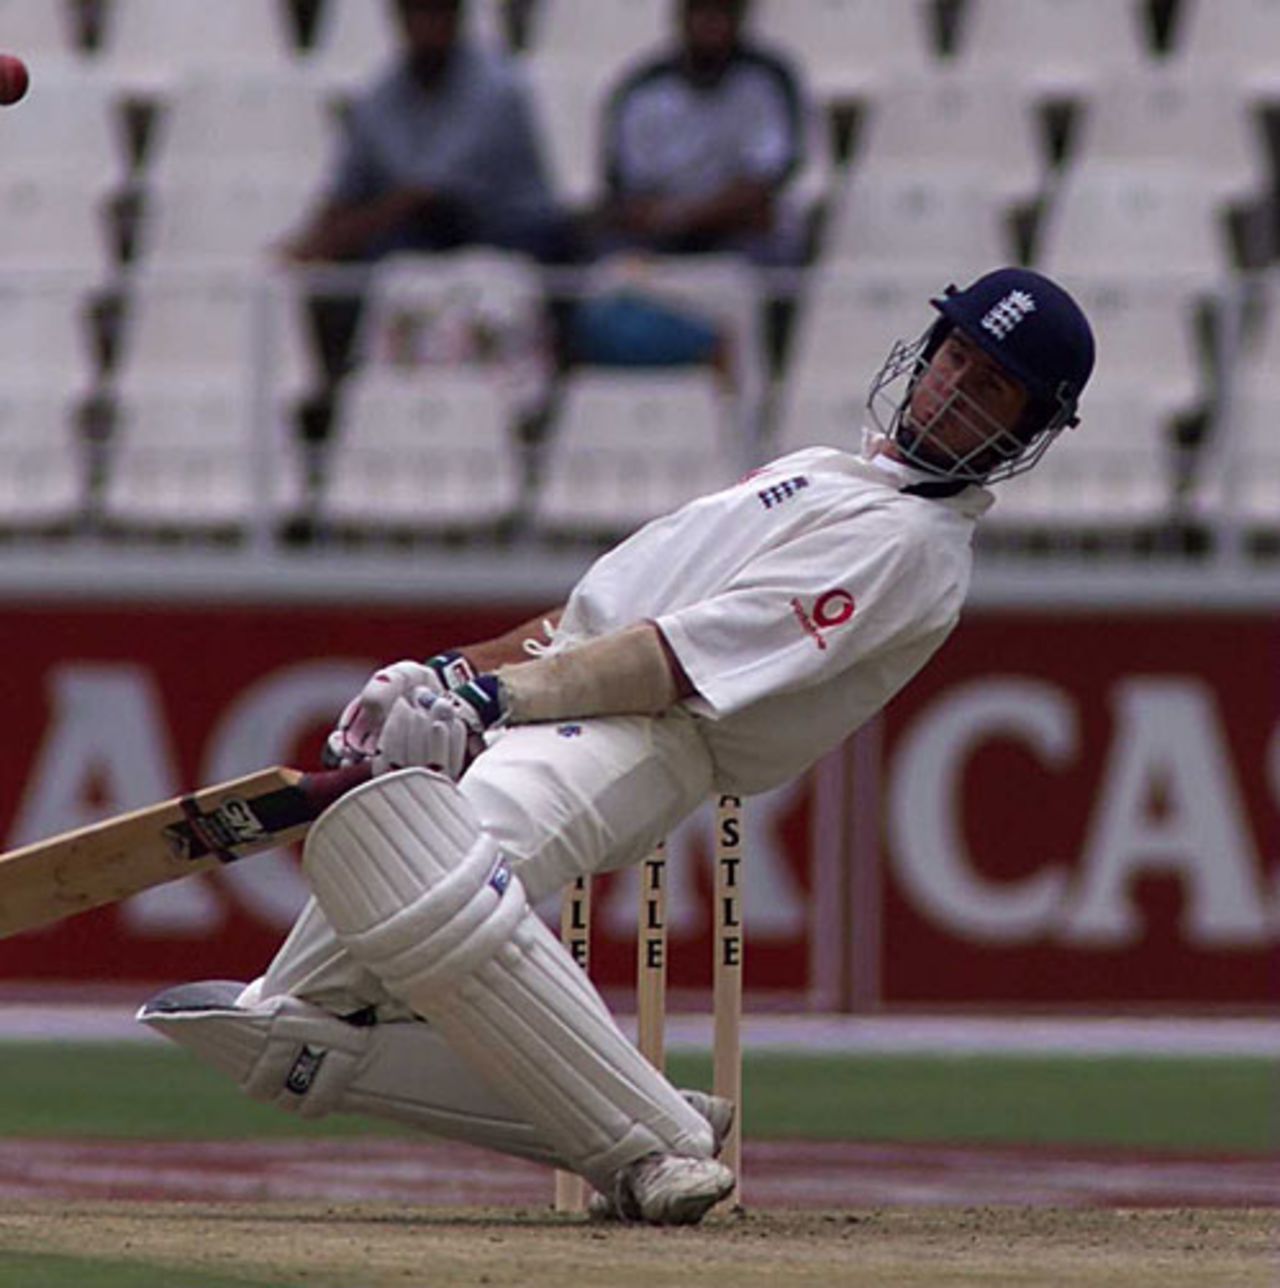 Michael Vaughan weaves away from a bouncer, South Africa v England, 1st Test, Johannesburg, 1st day, November 25, 1999